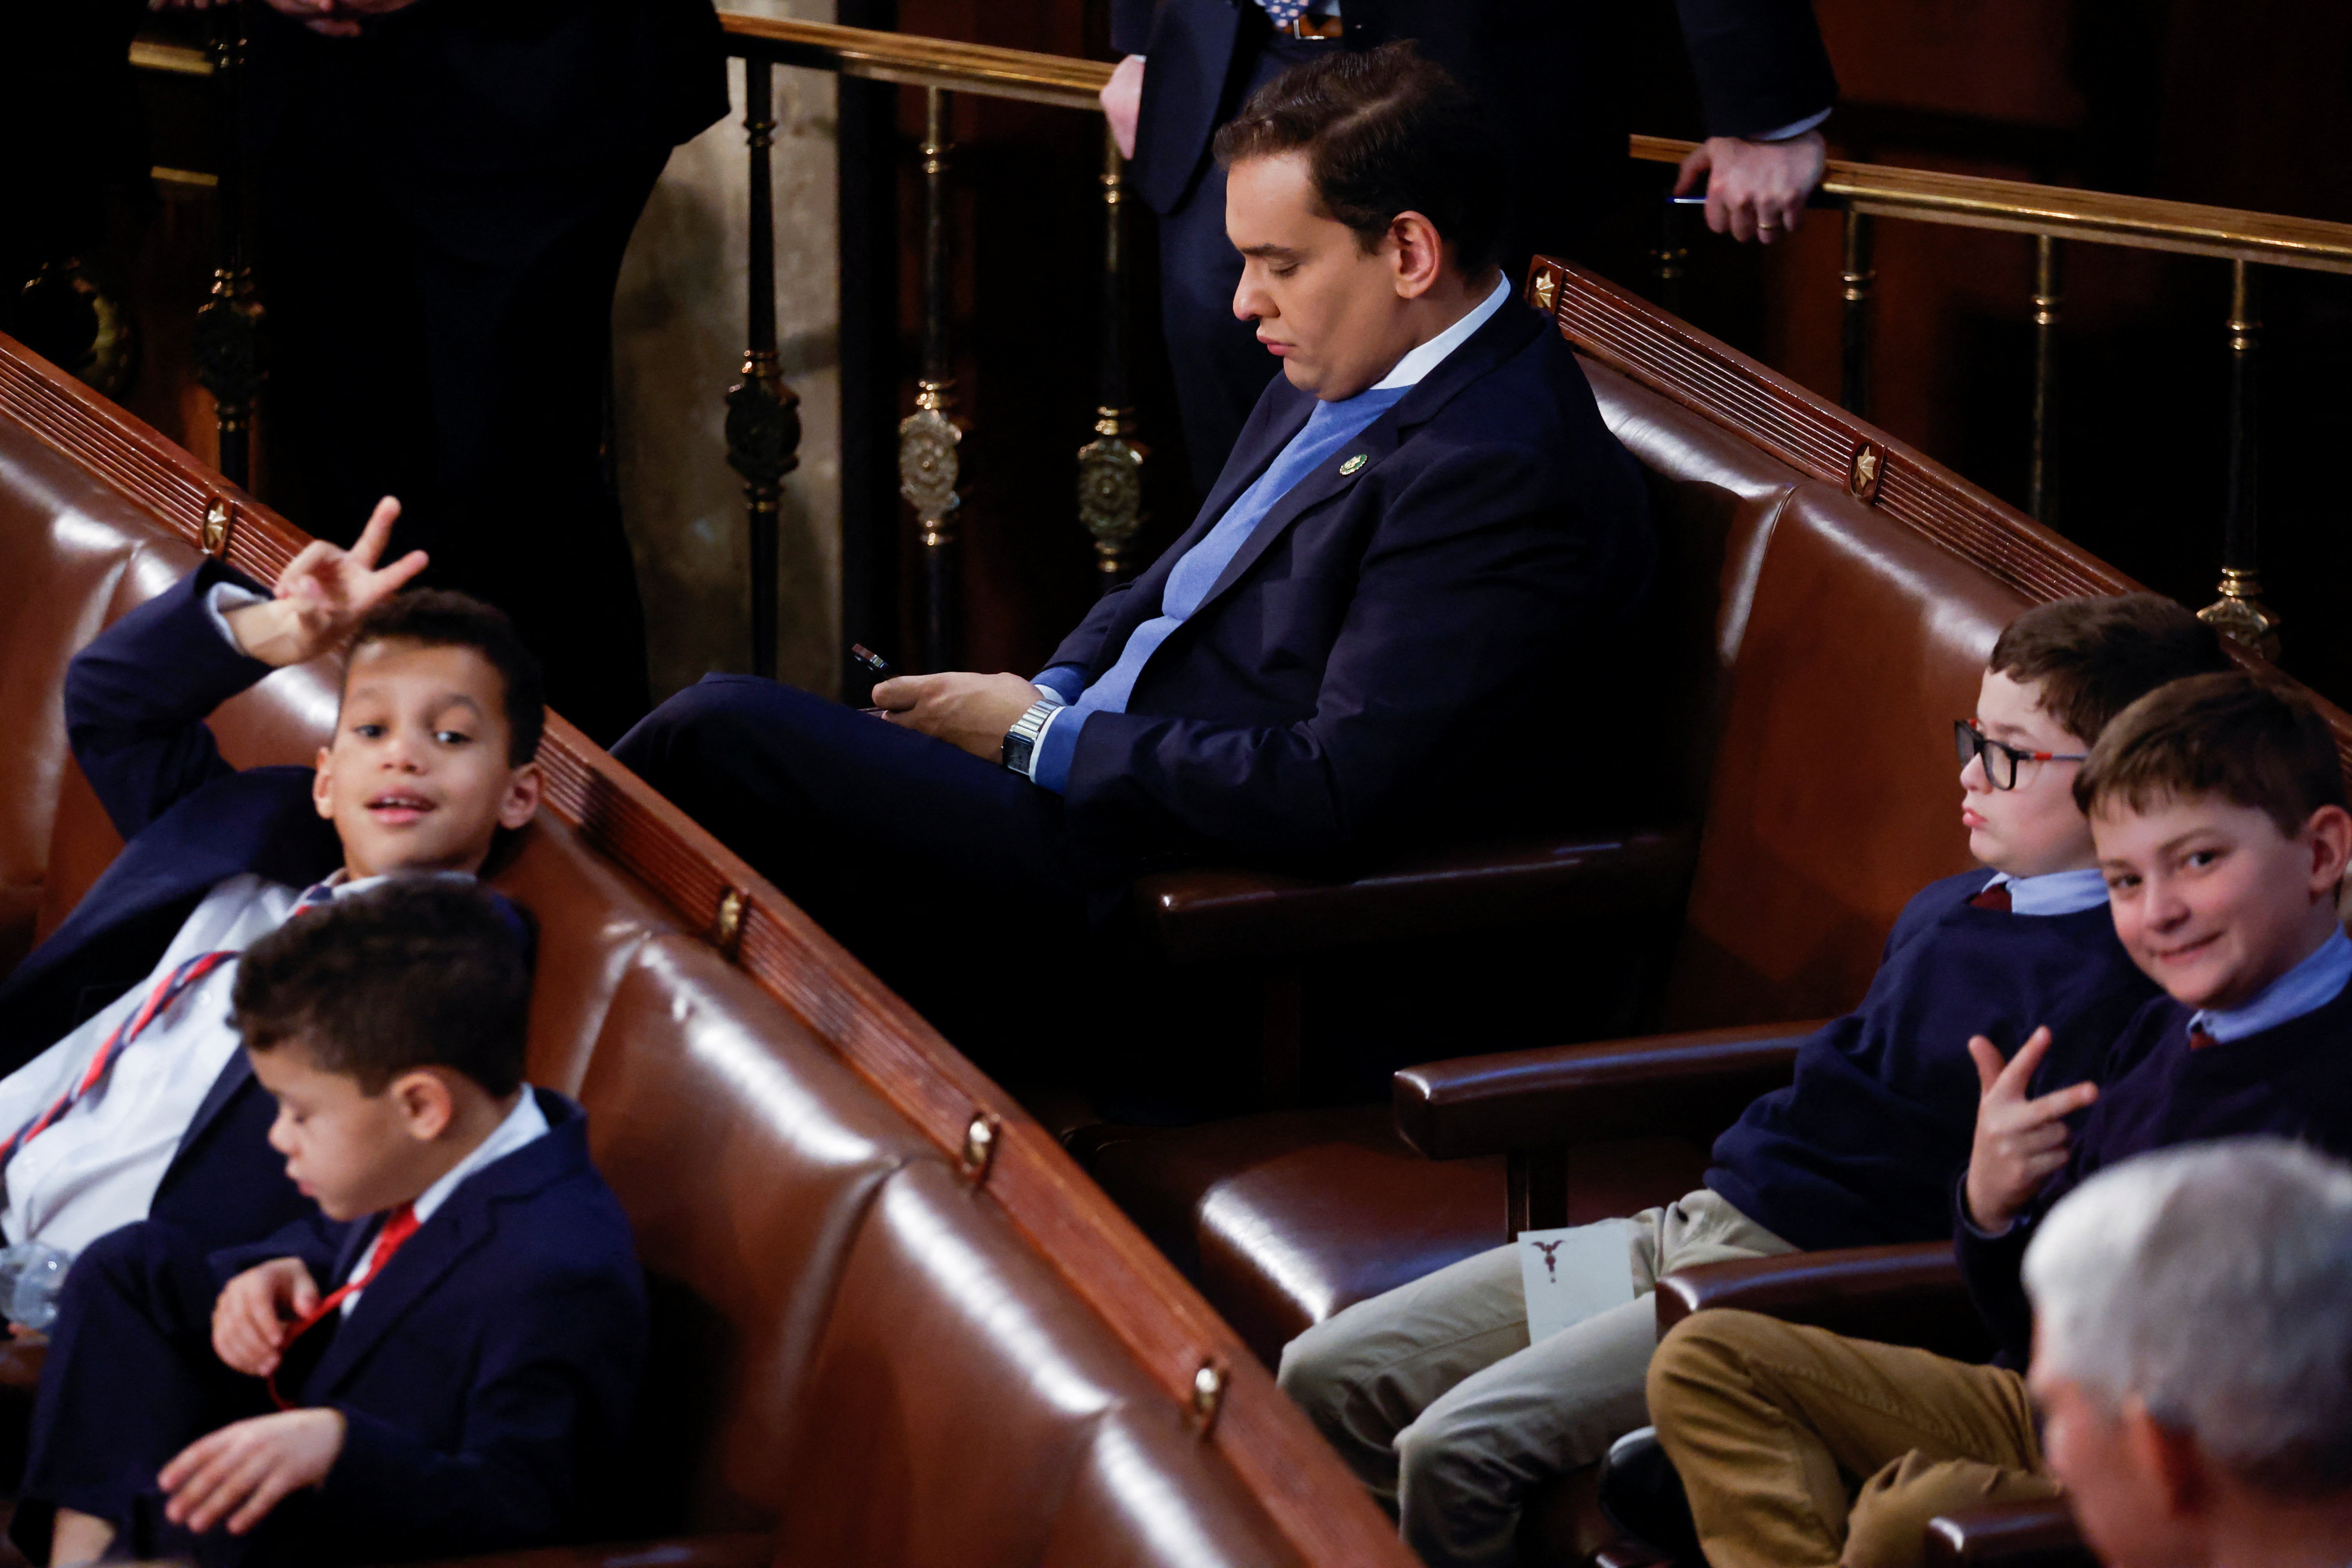 George Santos, an incoming House rep. from New York who lied about nearly every aspect of his background and biography, looking at his phone, sitting near kids, in Congress.